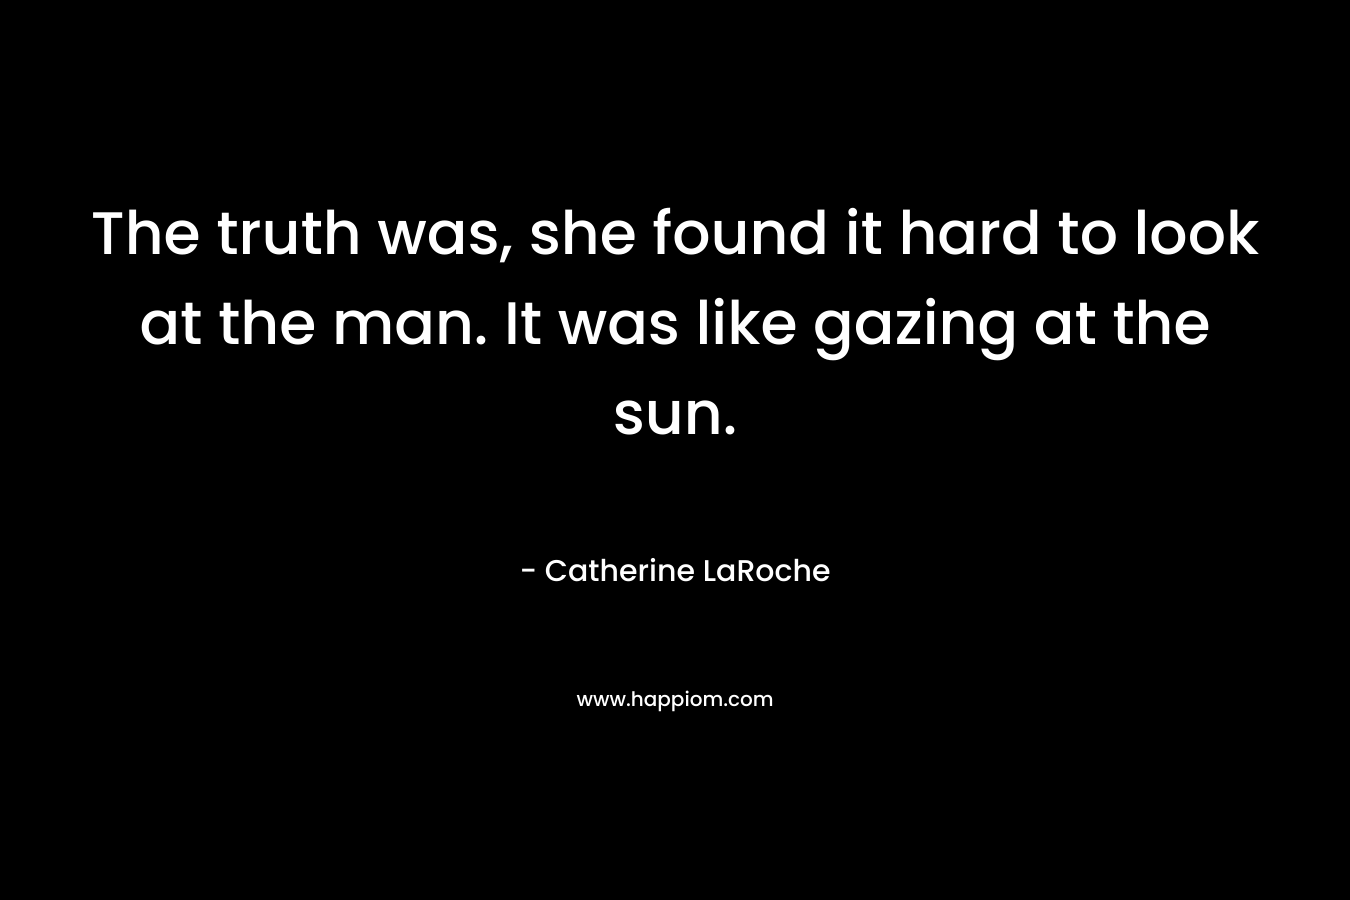 The truth was, she found it hard to look at the man. It was like gazing at the sun. – Catherine LaRoche